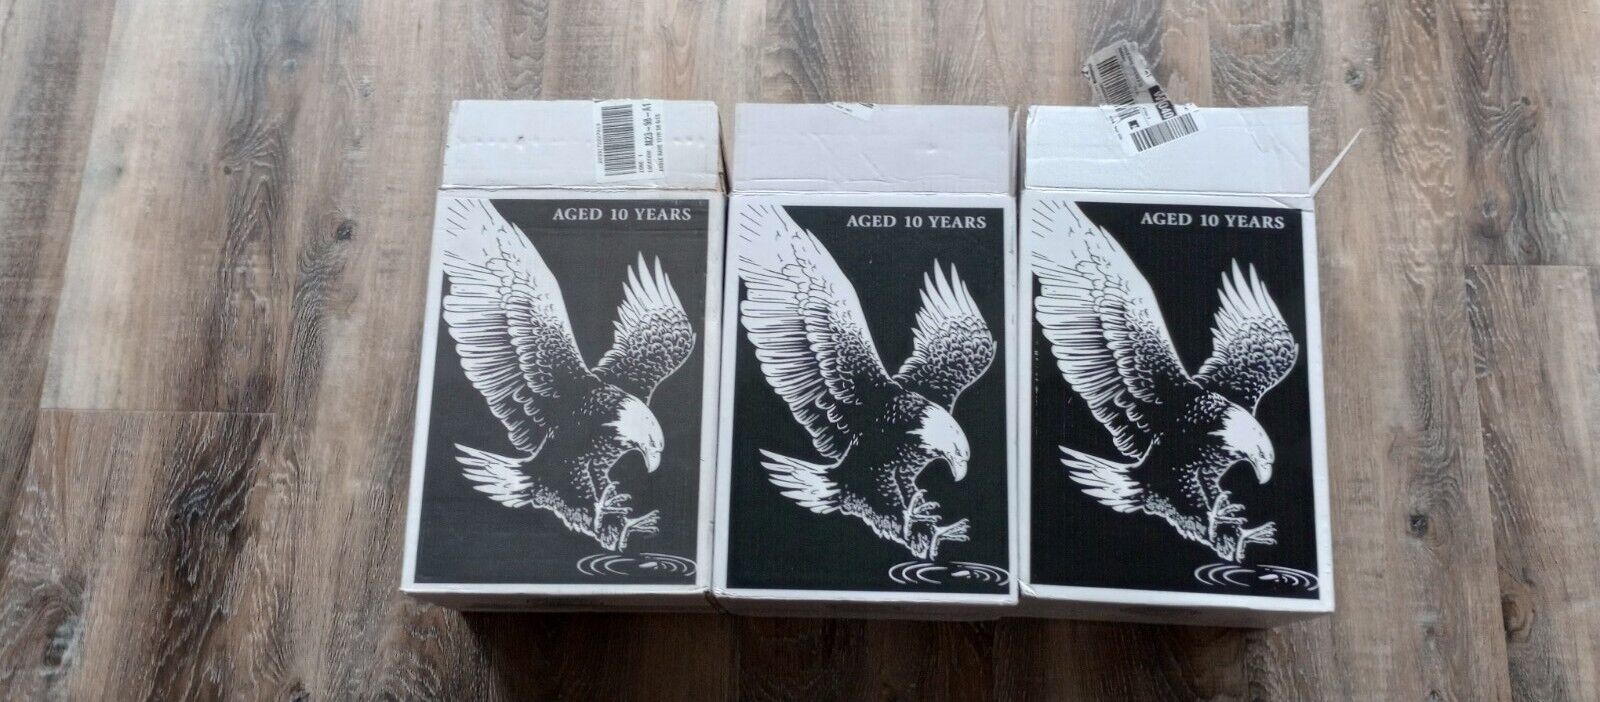 Eagle Rare Bourbon Empty Boxes With Inserts